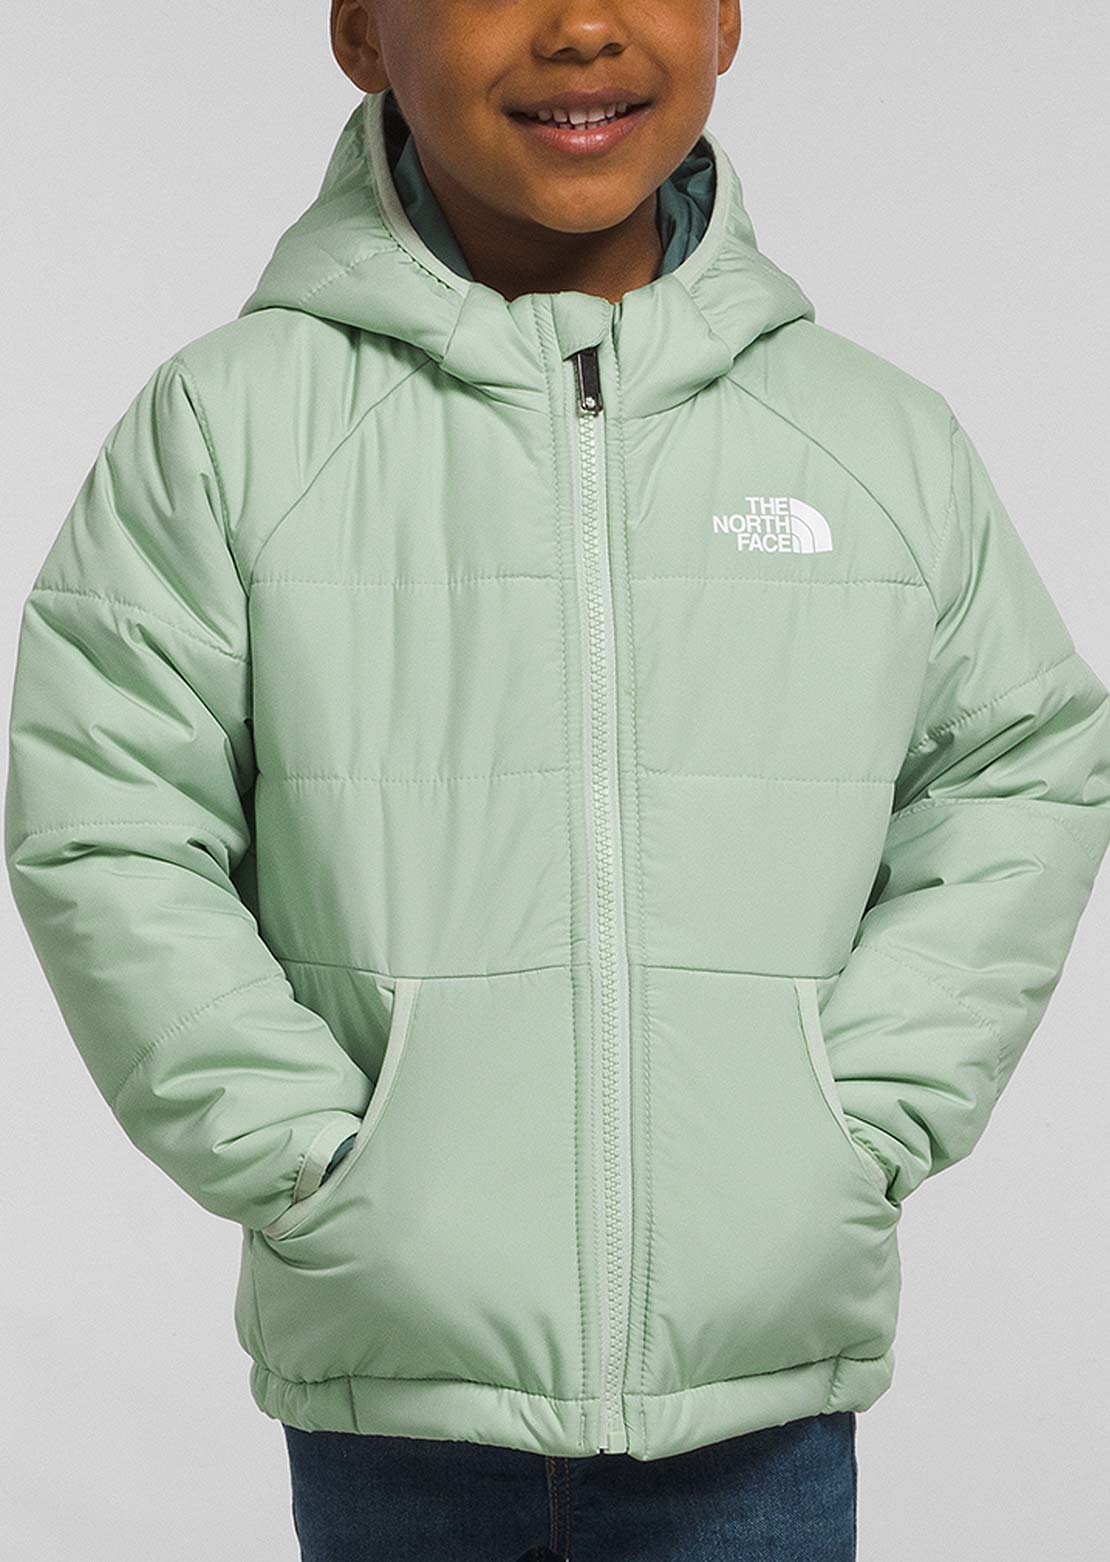 The North Face Toddler Reversible Perrito Hooded Jacket Misty Sage